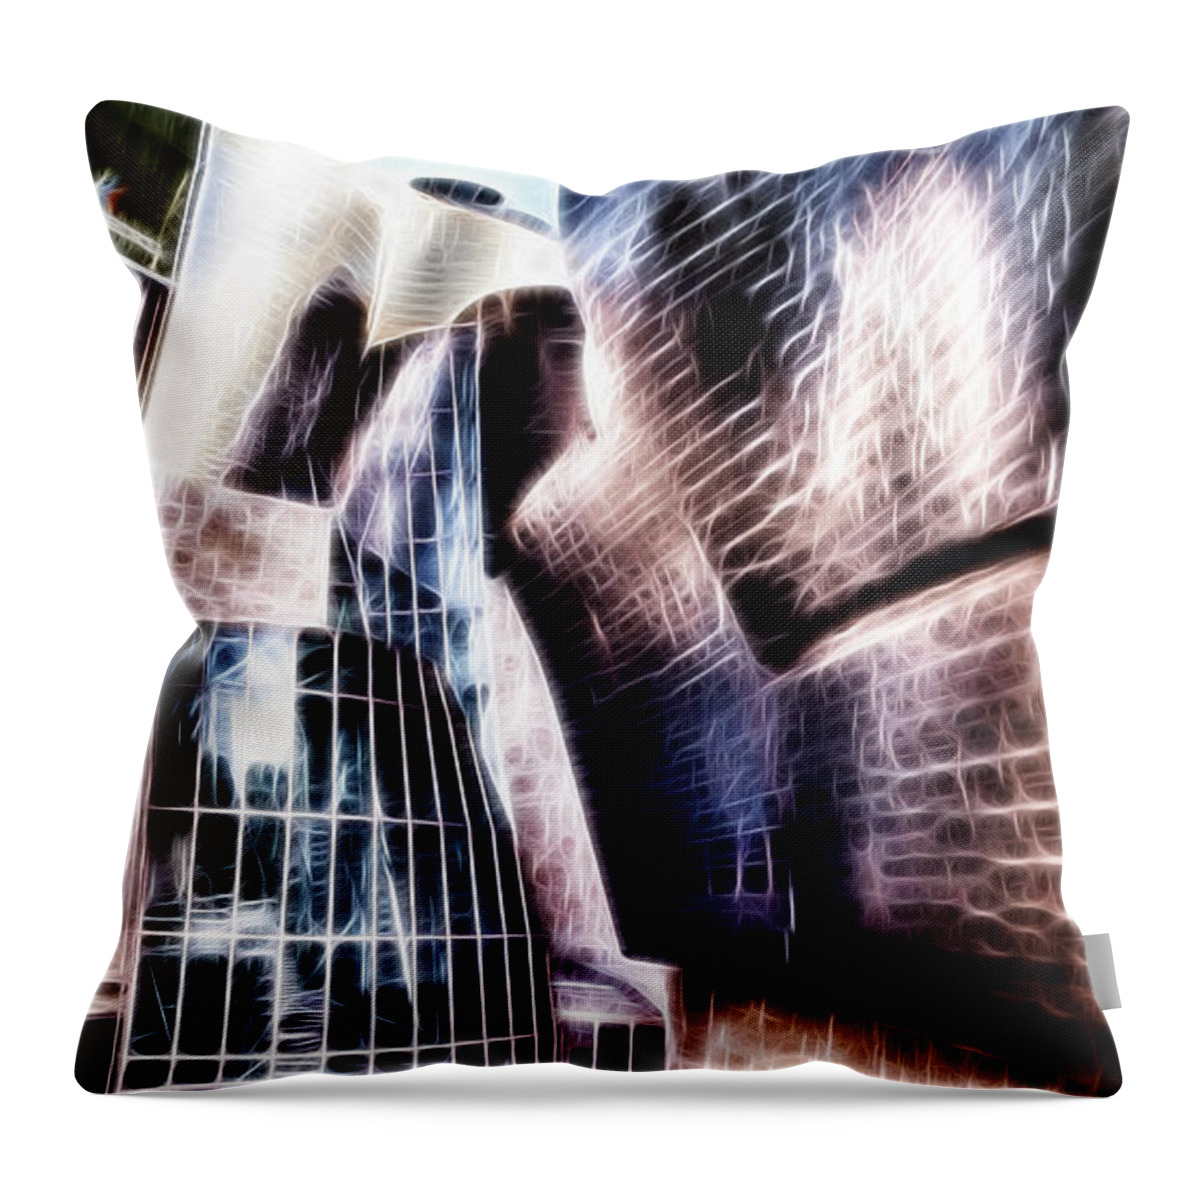 Guggenheim Throw Pillow featuring the photograph Main Entrance of Guggenheim Bilbao Museum in the Basque Country Fractal by Weston Westmoreland